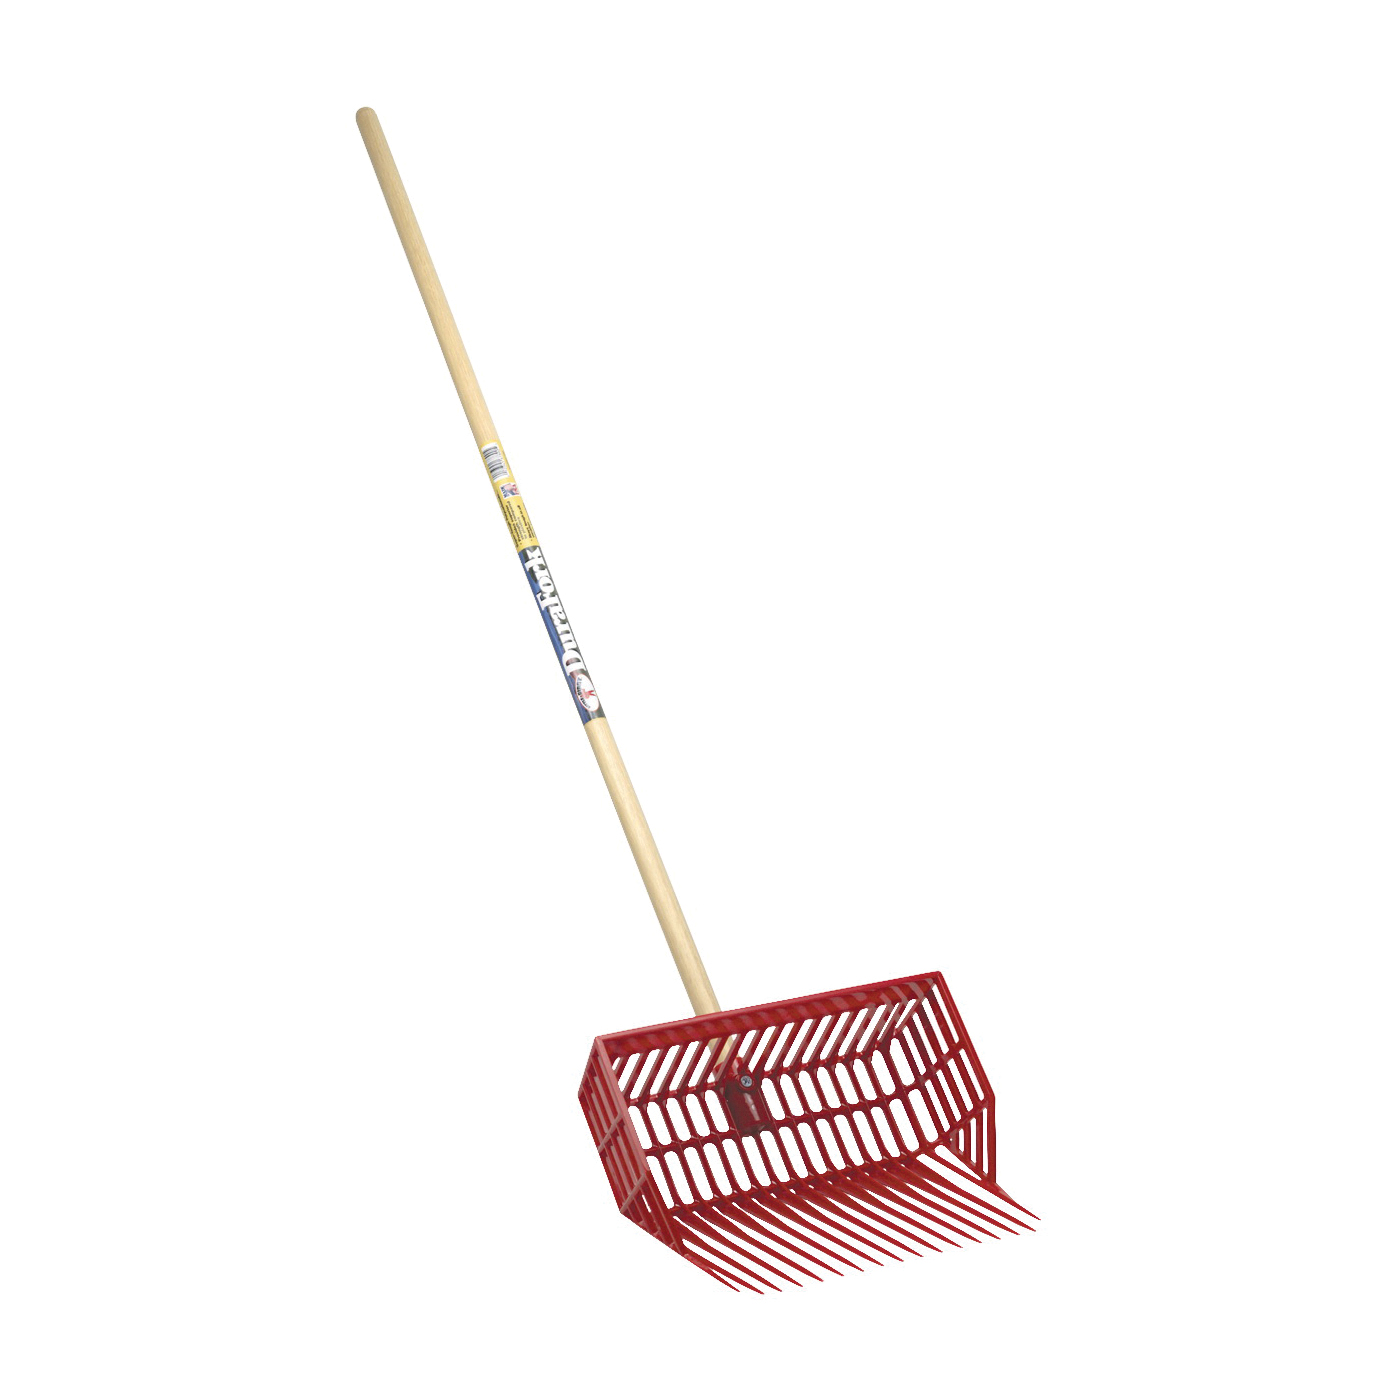 DuraPitch II DP2RED Manure Fork, Basket Tine, Polycarbonate Tine, Wood Handle, Red, 52 in L Handle